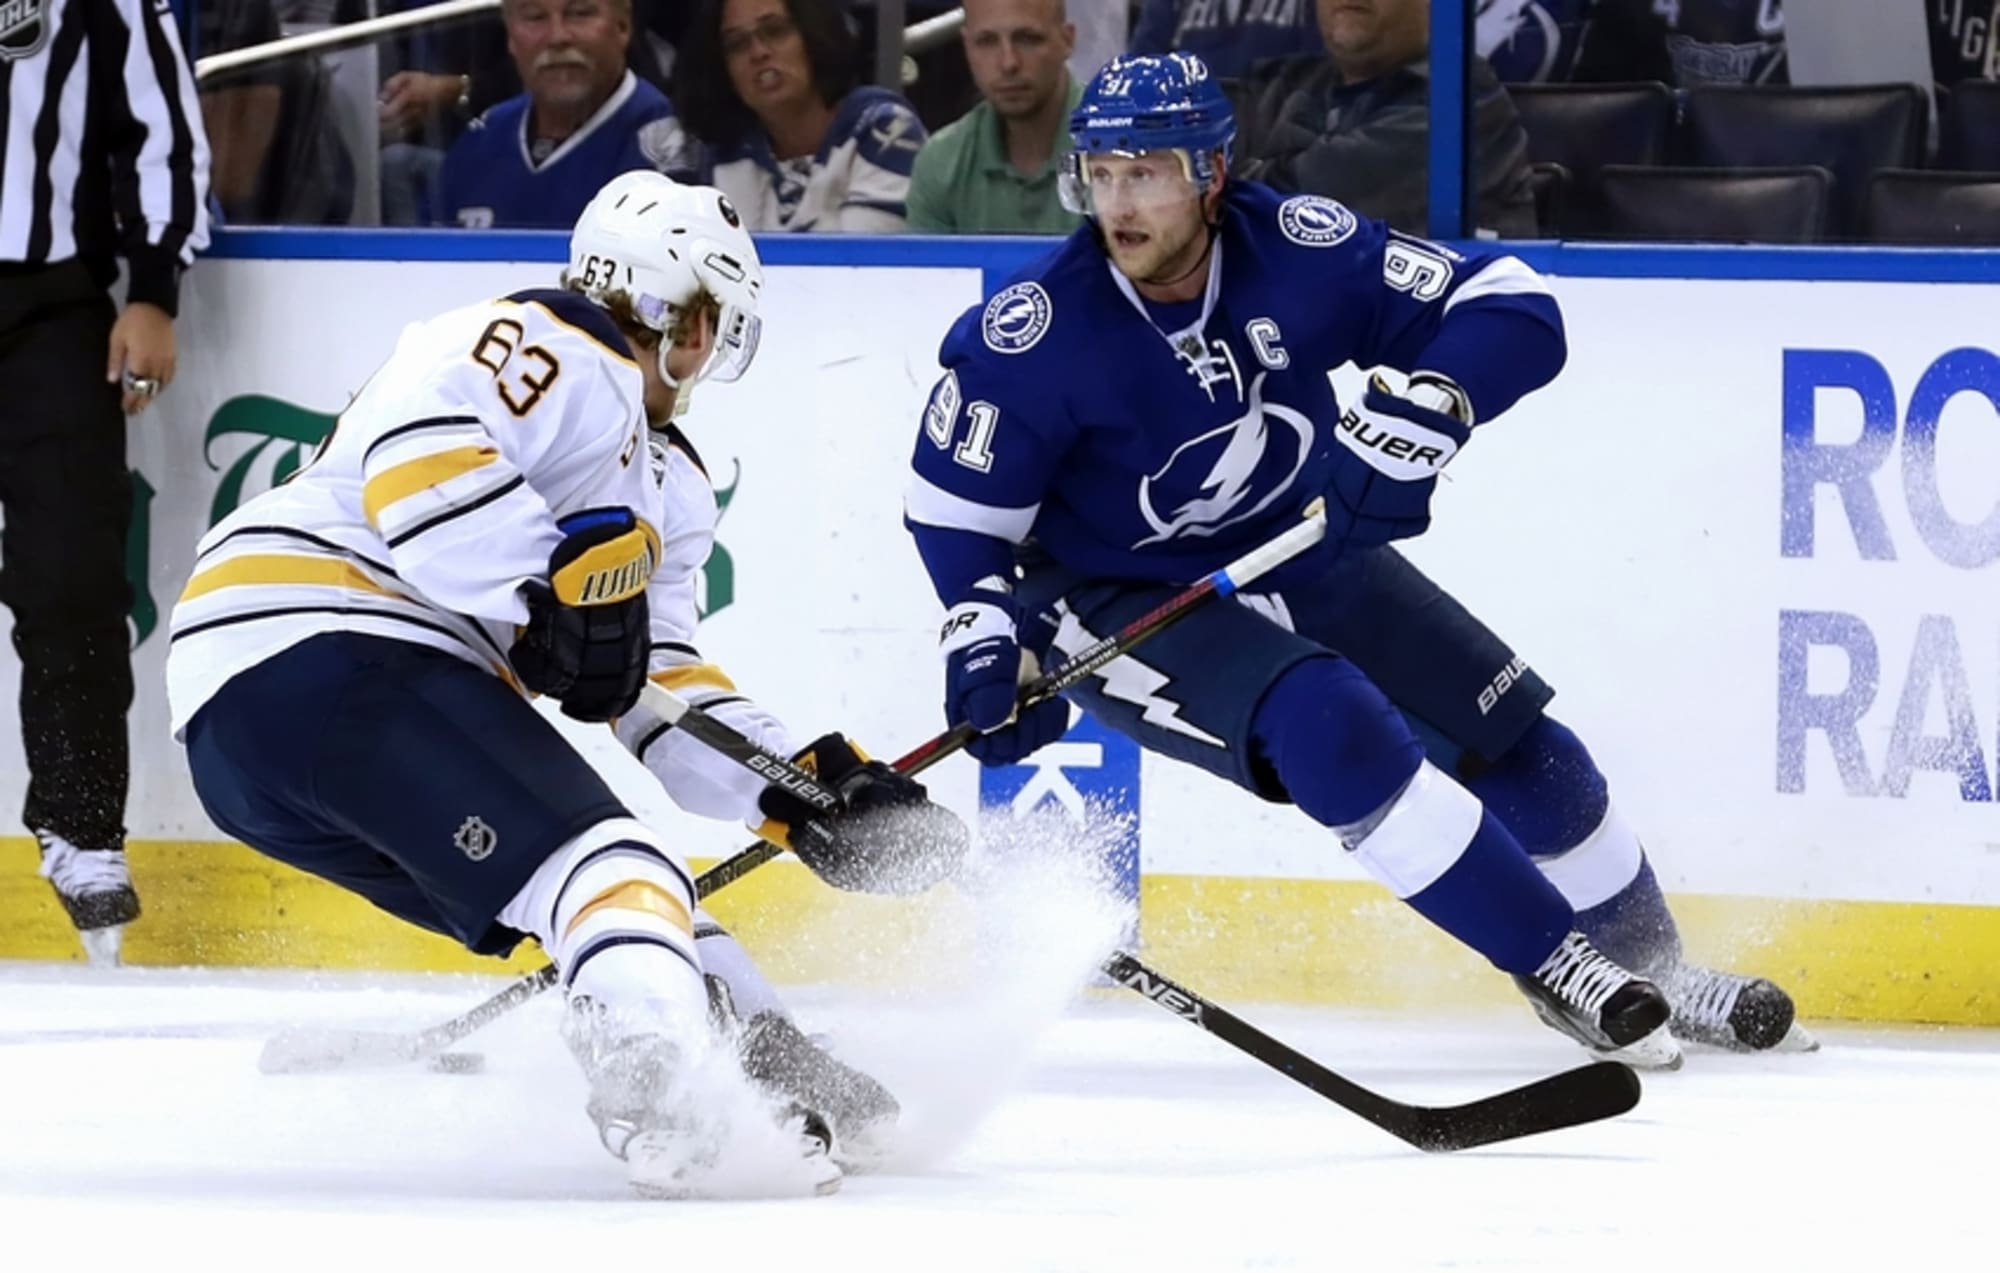 Has Steven Stamkos of the Tampa Bay Lightning fully recovered from